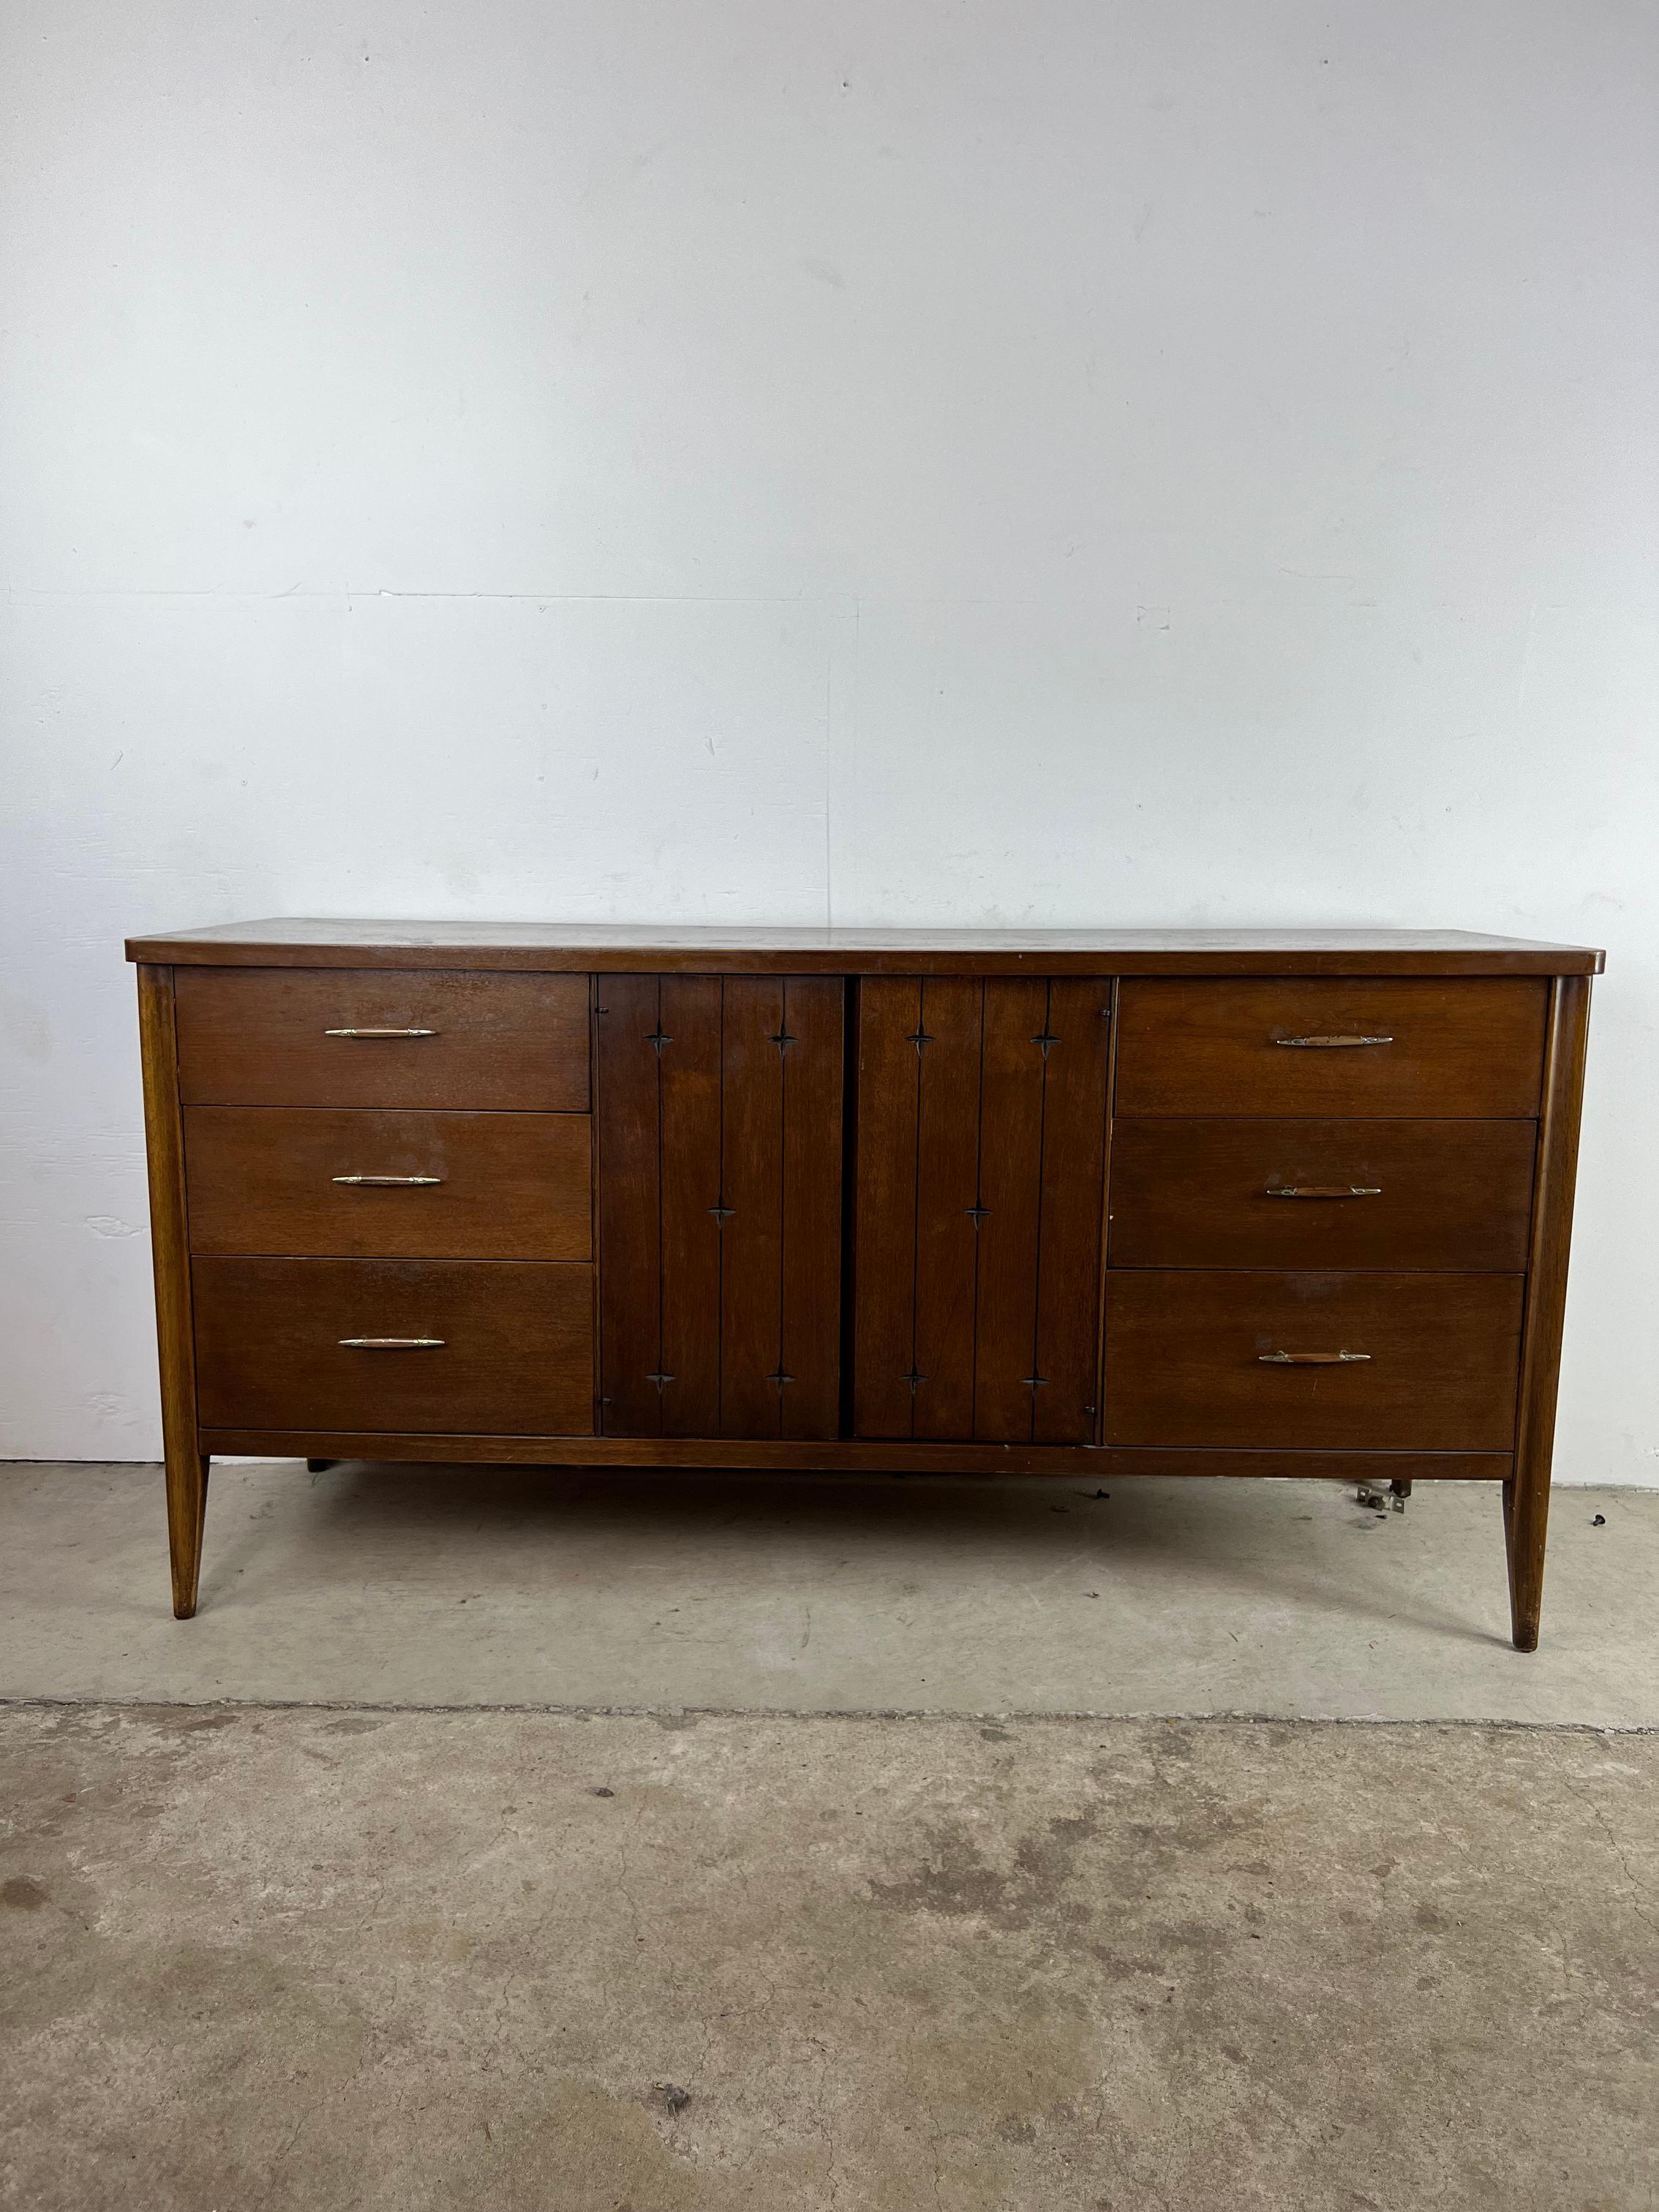 This Mid-Century Modern lowboy dresser from the SAGA line by Broyhill features hardwood construction, original walnut finish, nine dovetailed drawers, two cabinet doors with carved cross detailing, and tall tapered legs.

 